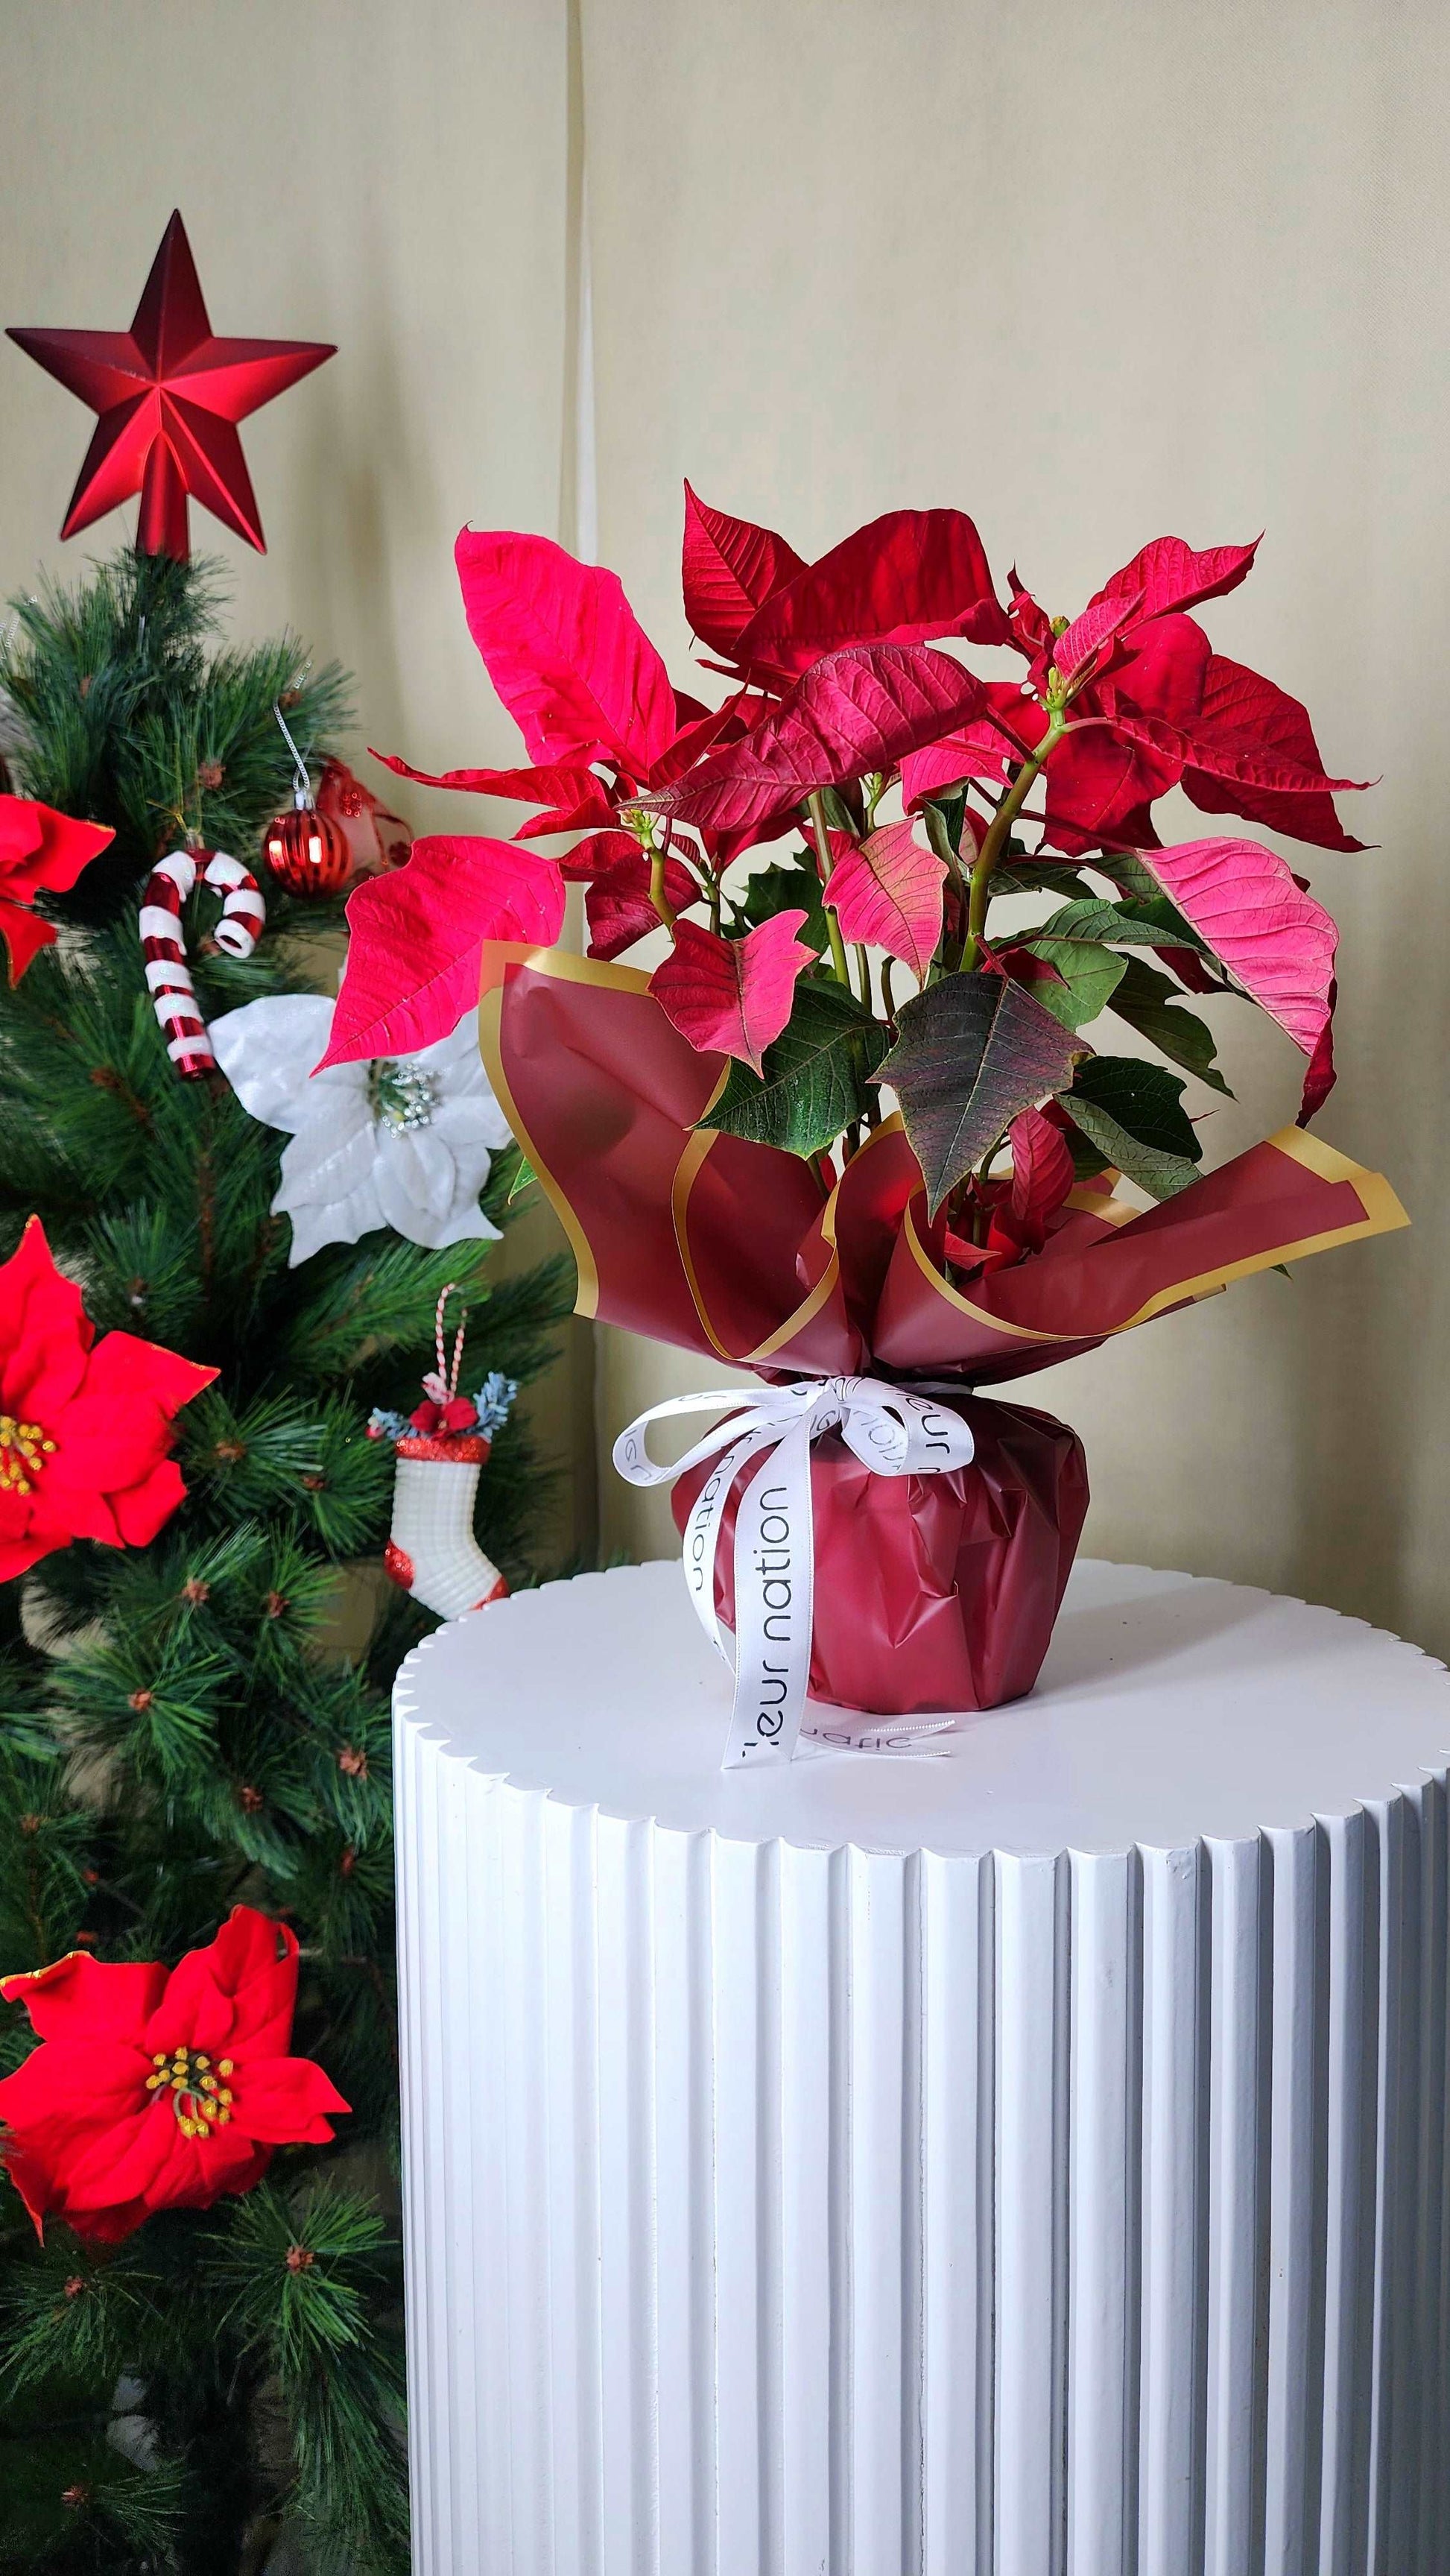 Poinsettias - Festive Christmas Flowers - Fleur Nation - flowers, chocolates, cakes and gifts same day delivery in Dubai